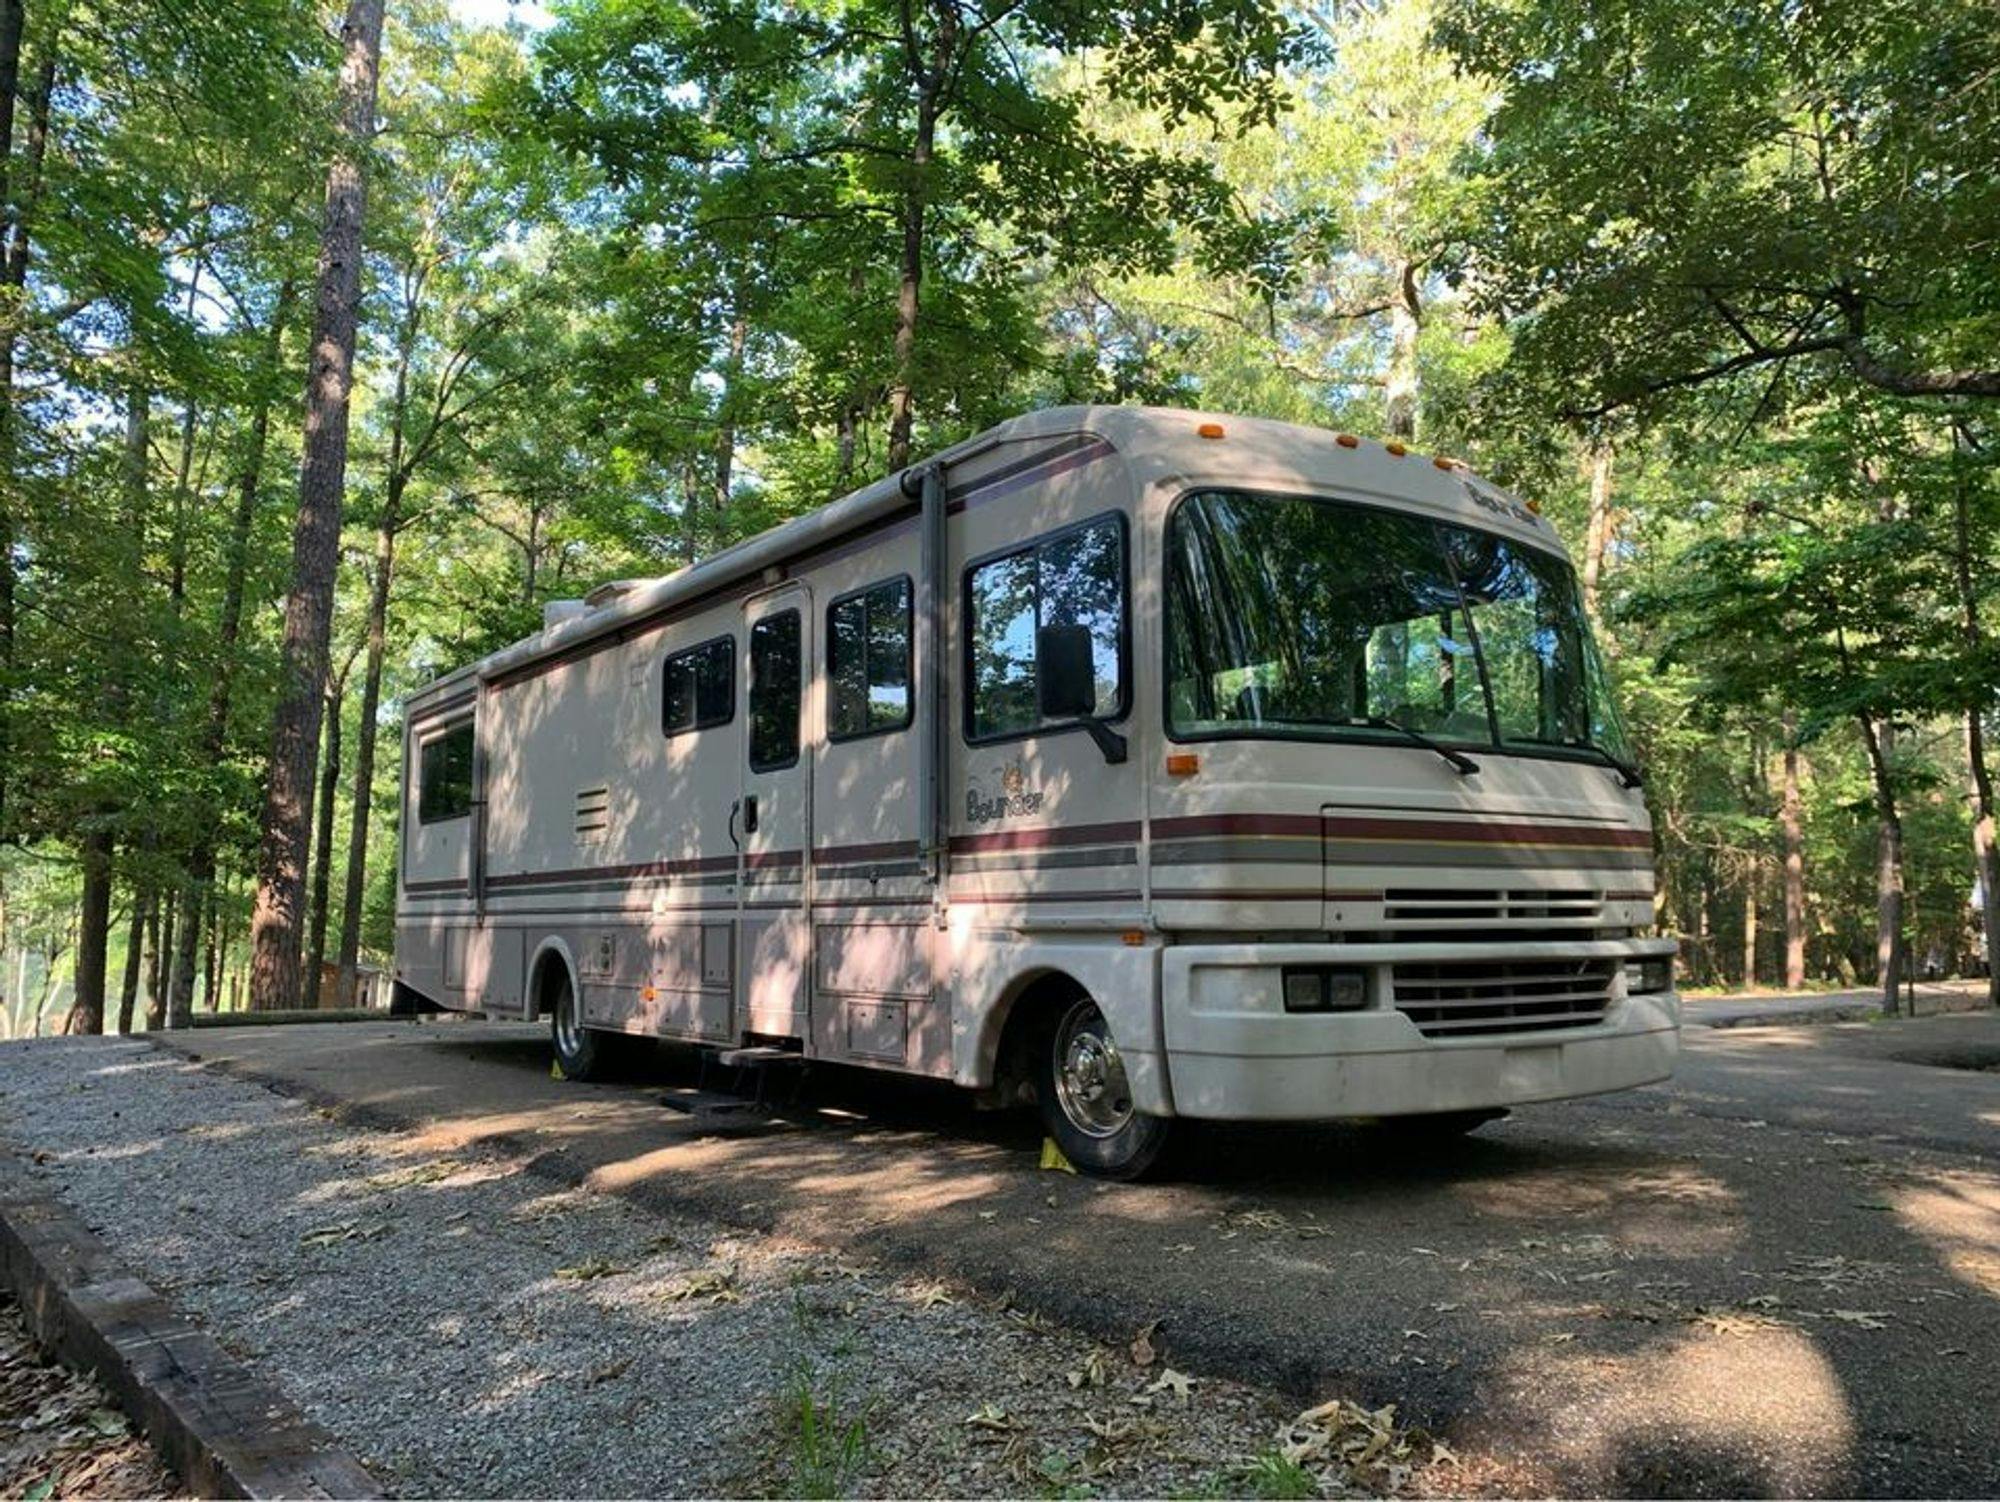 So I bought an RV....